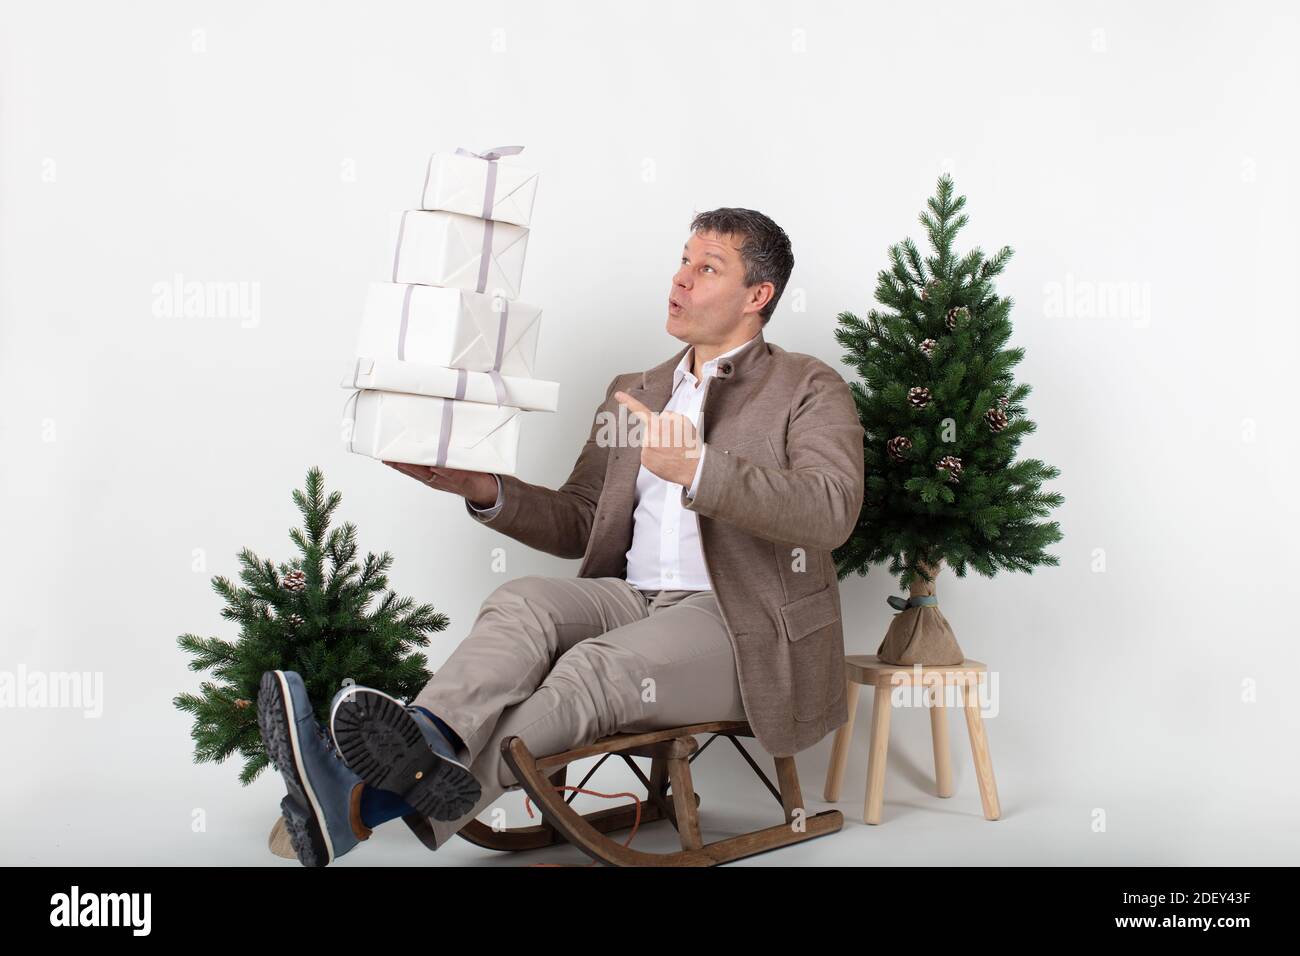 Christmas themed horizontal business portrait of a smart casual dressed male executive sitting on a sleigh juggling white wrapped gift boxes all set o Stock Photo